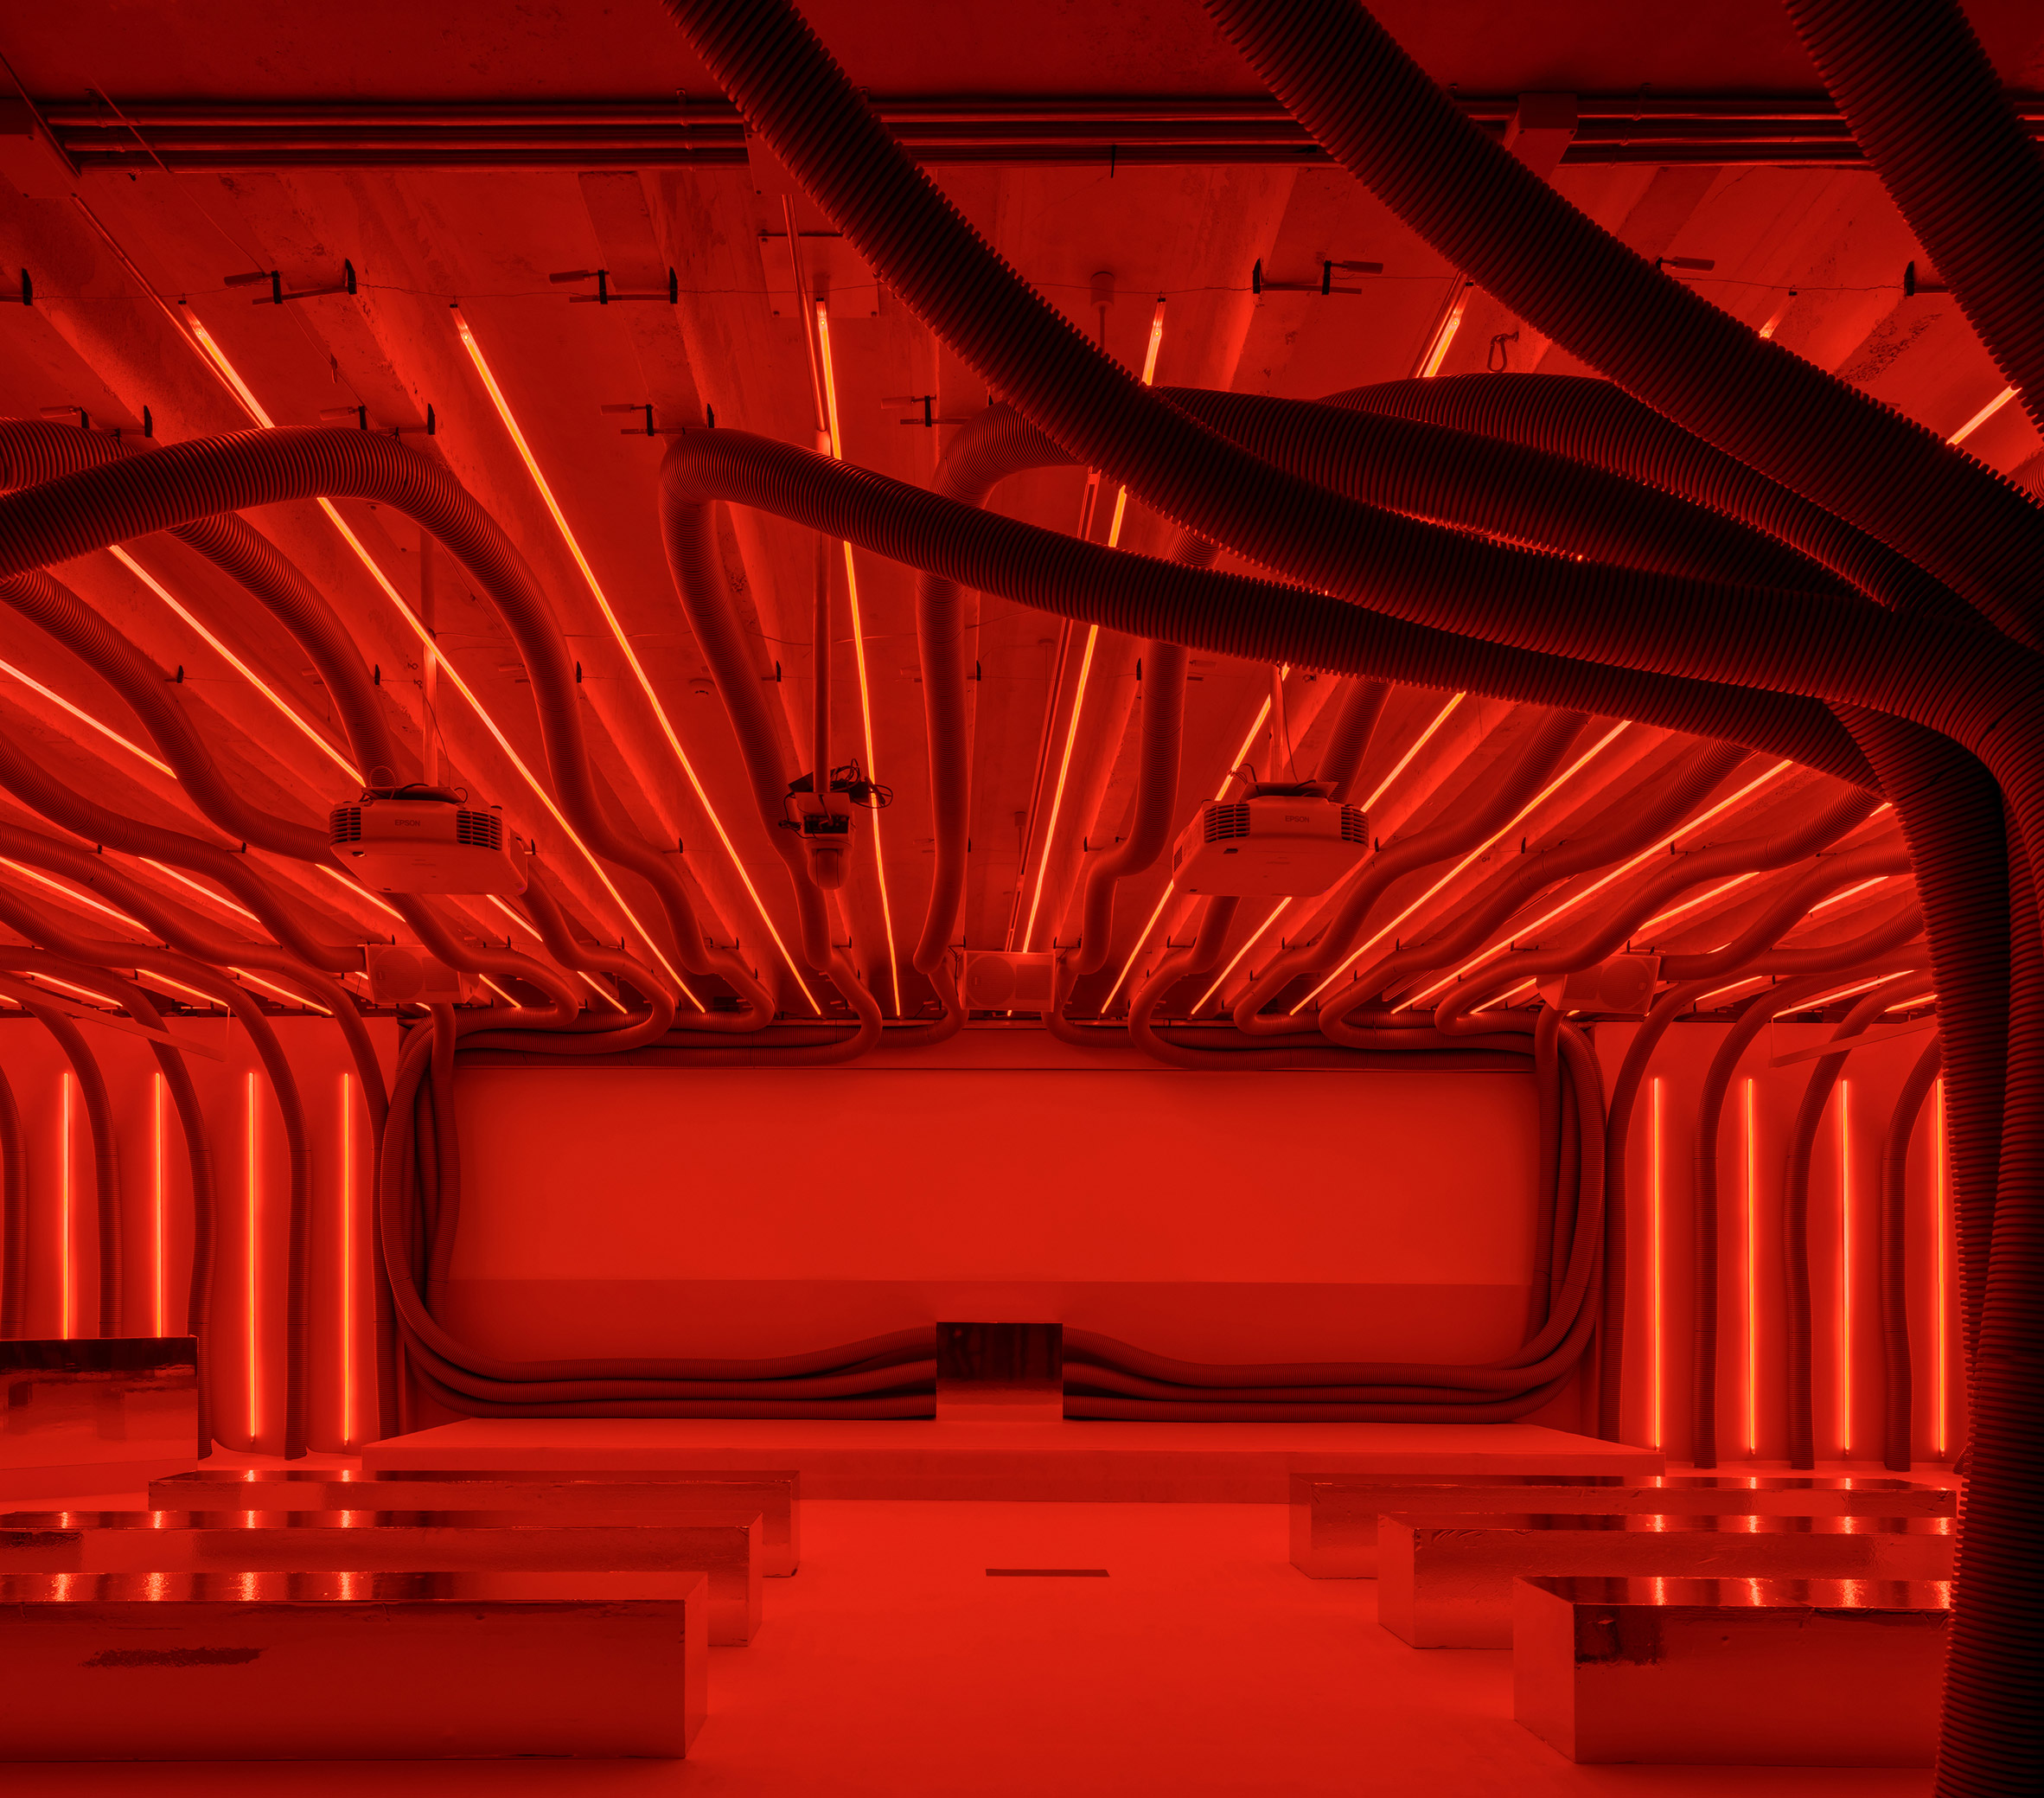 Lecture hall filled with corrugated plastic tubes and red neon light in installation by Pareid